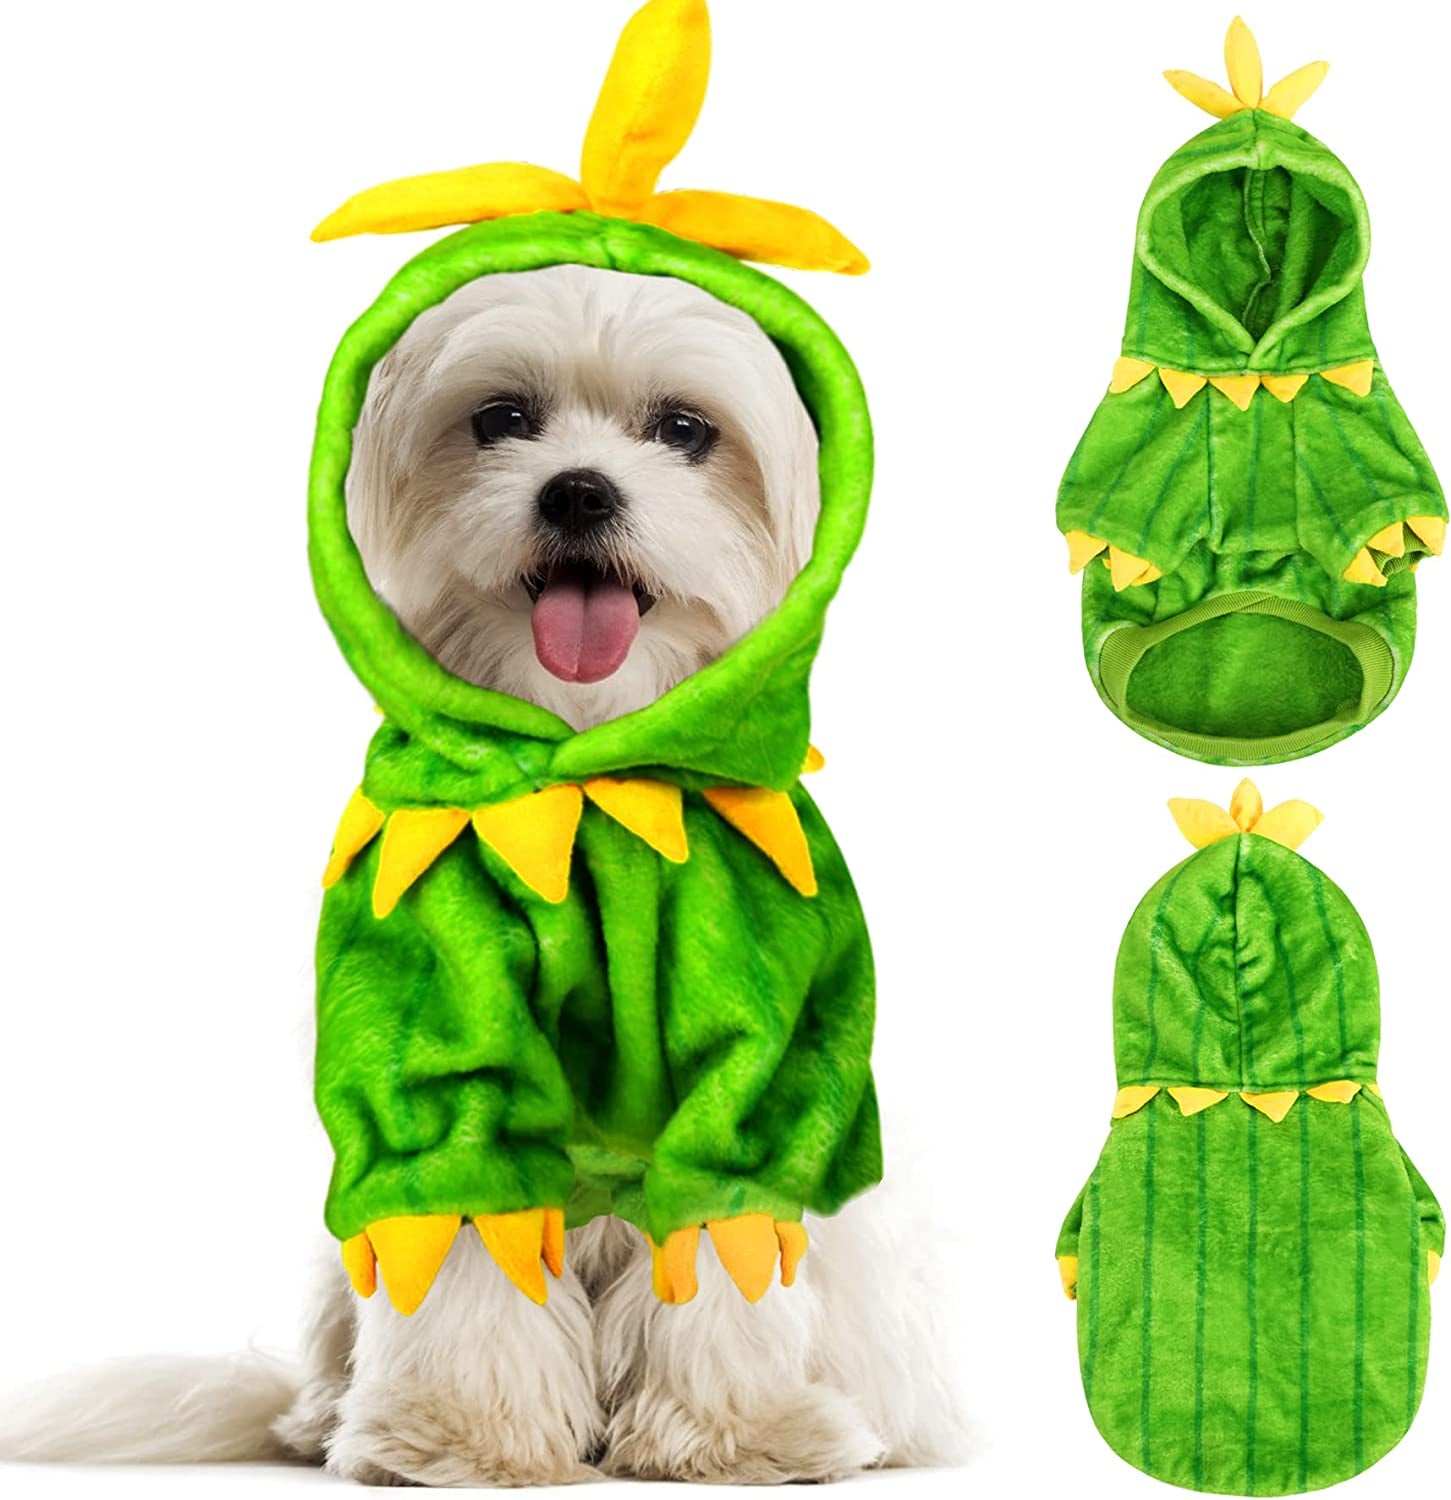 MIGOHI Dog Halloween Costumes, Cute Green Cactus Shape Dog Hoodie Coat for Daily Wear Outdoor Walking, Puppy Funny Cosplay Adorable Coral Velvet Hooded Pajamas for Small Medium Dogs Animals & Pet Supplies > Pet Supplies > Dog Supplies > Dog Apparel MIGOHI Green Cactus XX-Small 